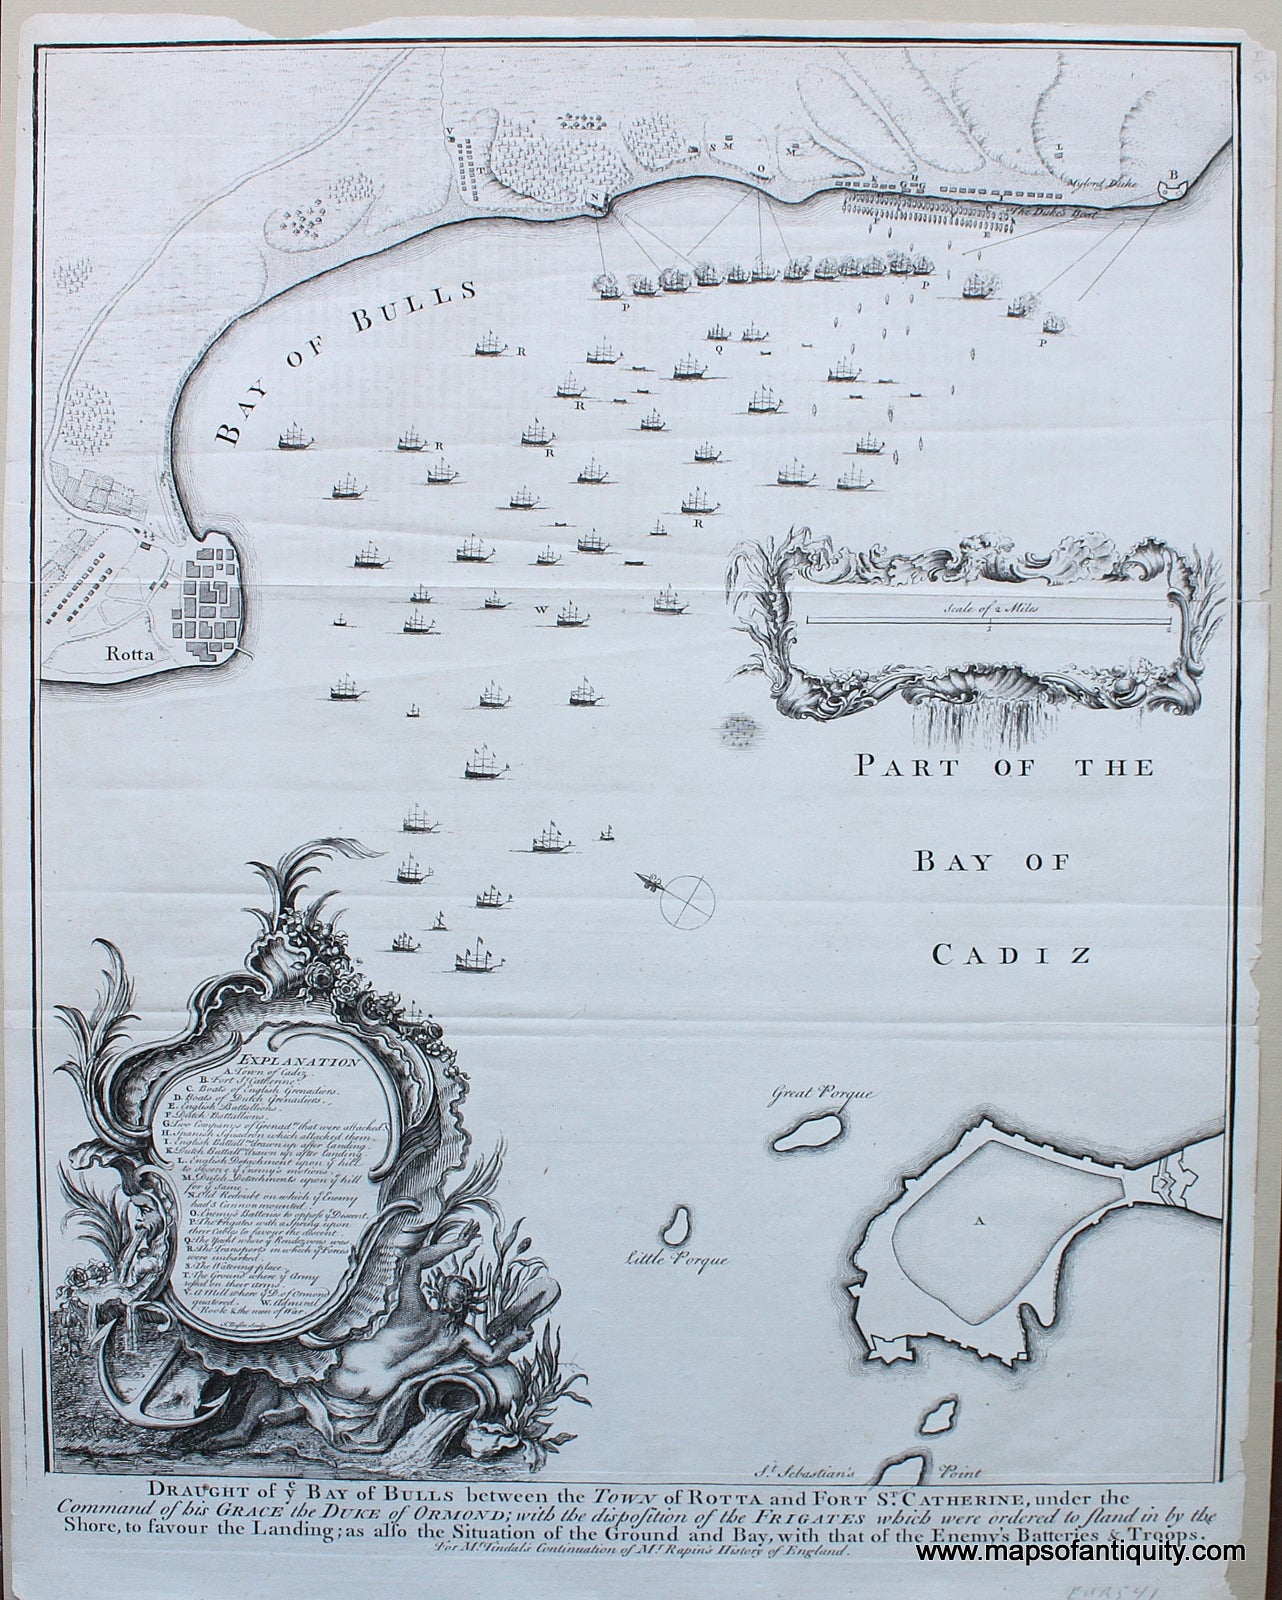 Black-and-White-Engraved-Antique-Harbor-Map-Draught-of-the-Bay-of-Bulls-between-the-Town-of-Rotta-and-Fort-St.-Catherine-under-the-Command-of-his-Grace-the-Duke-of-Ormond-with-the-disposition-of-the-Frigates-which-were-ordered-to-stand-in-by-the-Shore-to-favour-the-Landing-as-also-the-Situation-of-the-Ground-and-Bay-with-that-of-the-Enemy's-Batteries-&-Troops.-Europe-Spain-1745-Tindal/Rapin-Maps-Of-Antiquity